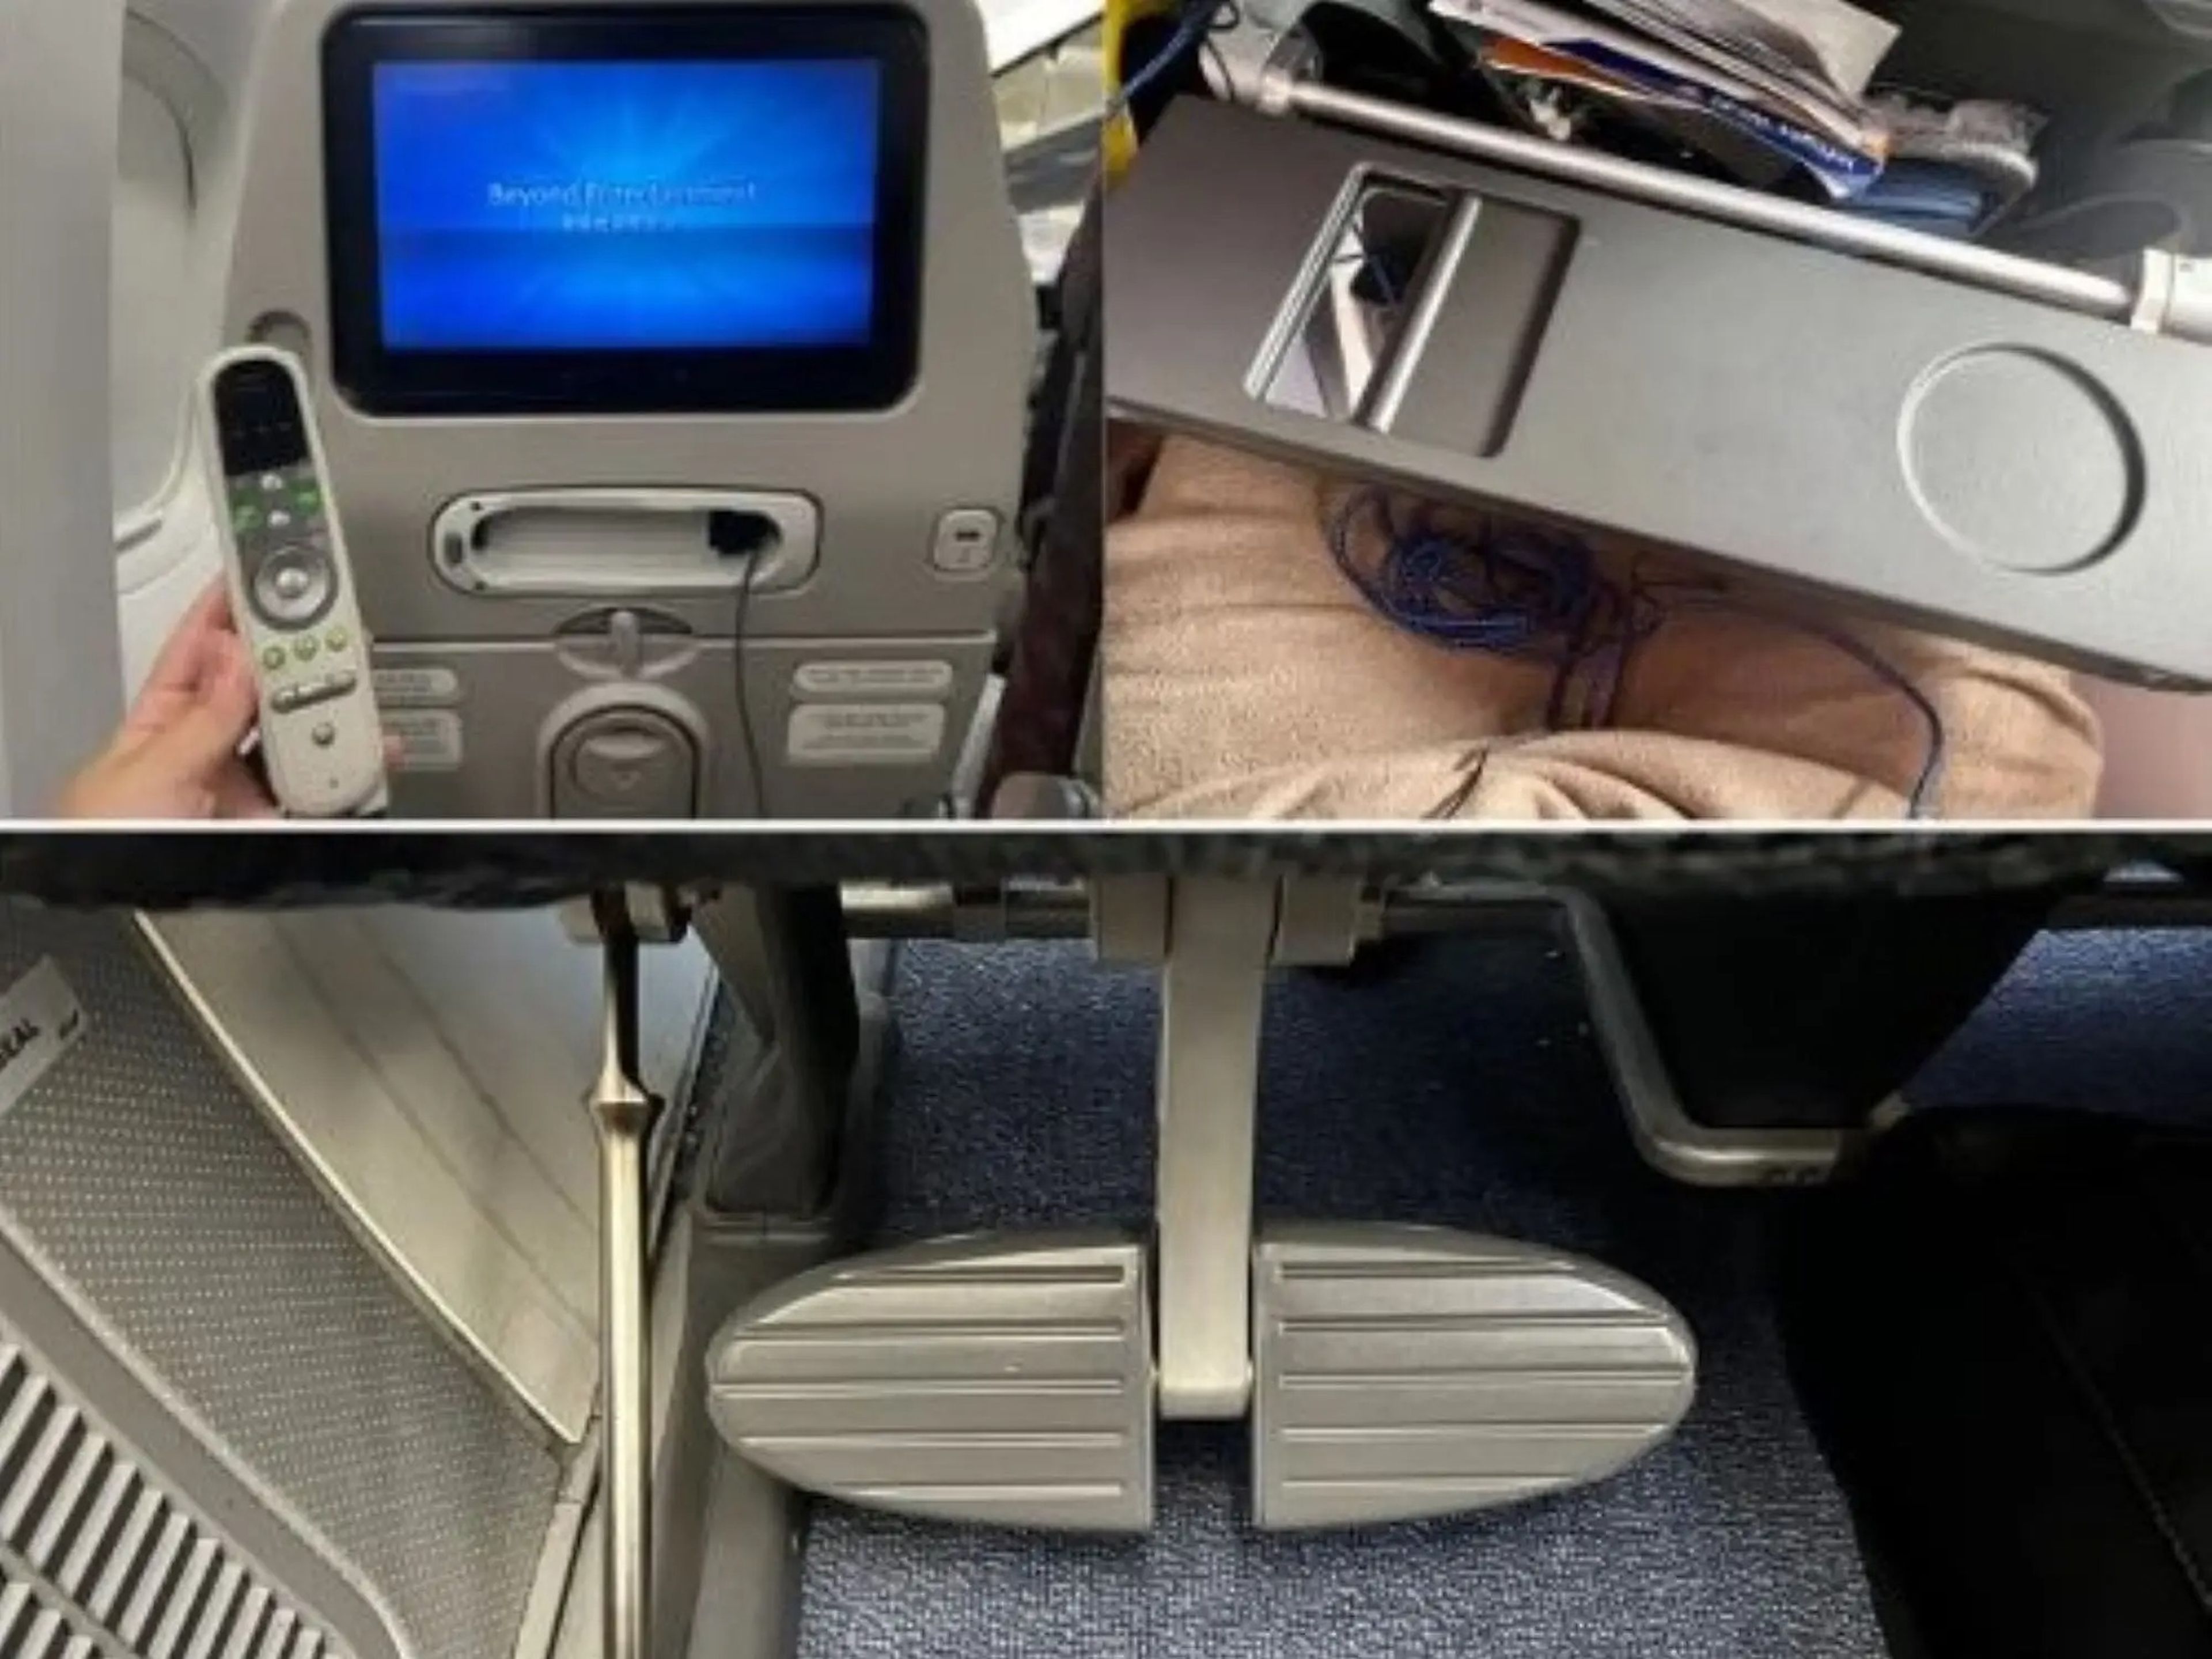 Remote and TV on ANA, mirror in the tray table on Singapore, and footrest on ANA.